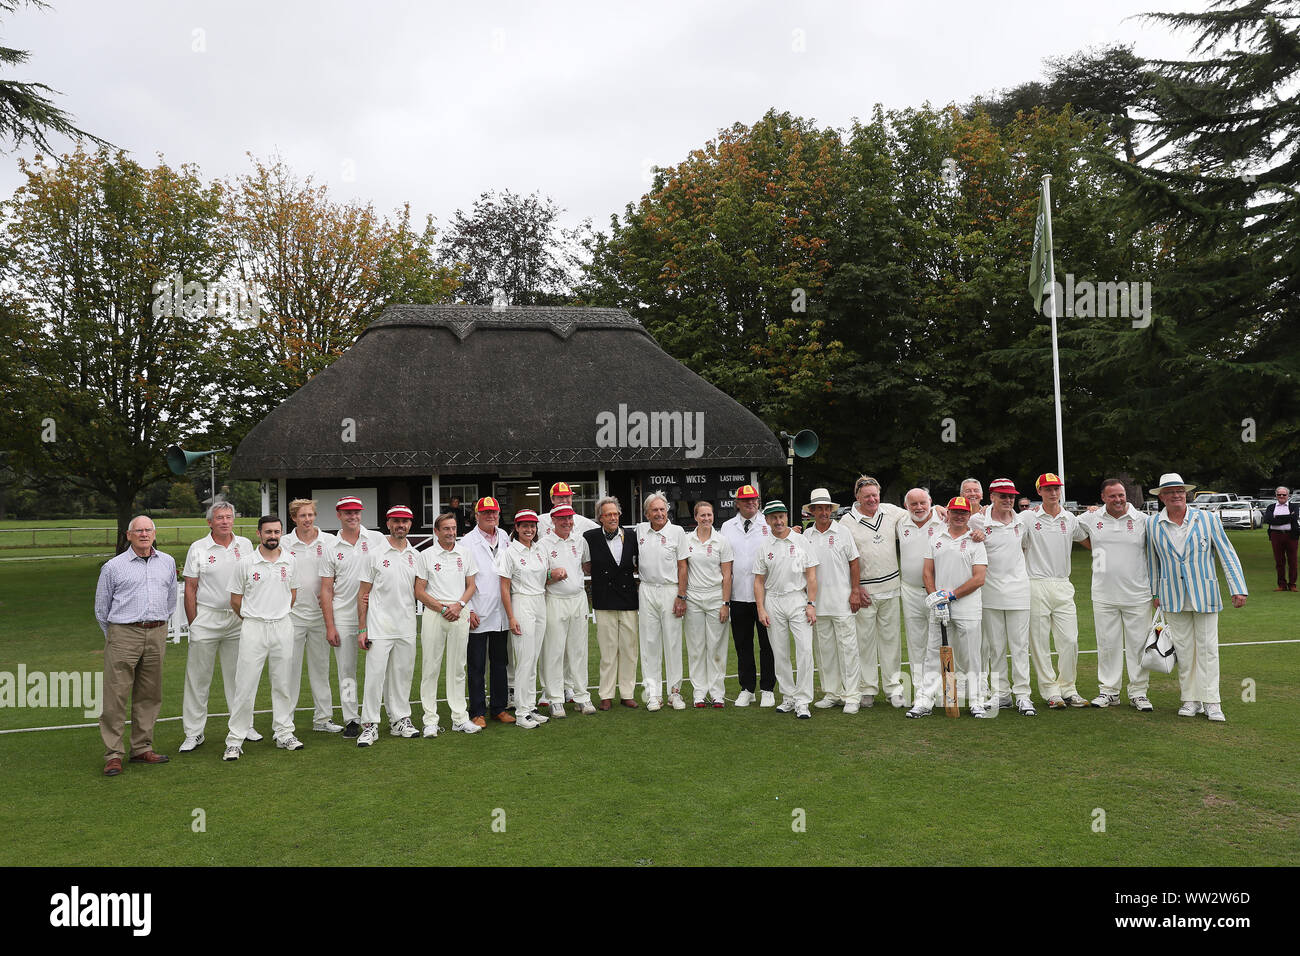 Goodwood, West Sussex, UK. 12th Sep, 2019. The Goodwood Revival cricket matchs teams pose for a photo with the Duke of Richmond & Gordon. The teams include many famous drivers such as Derek Bell, Brendon Hartley, Stuart Graham and are called the Duke of Richmond & Gordon's XI and the Earl of March & Kinrara's XI at the Goodwood Revival in Goodwood, West Sussex, UK. Credit: Malcolm Greig/Alamy Live News Stock Photo